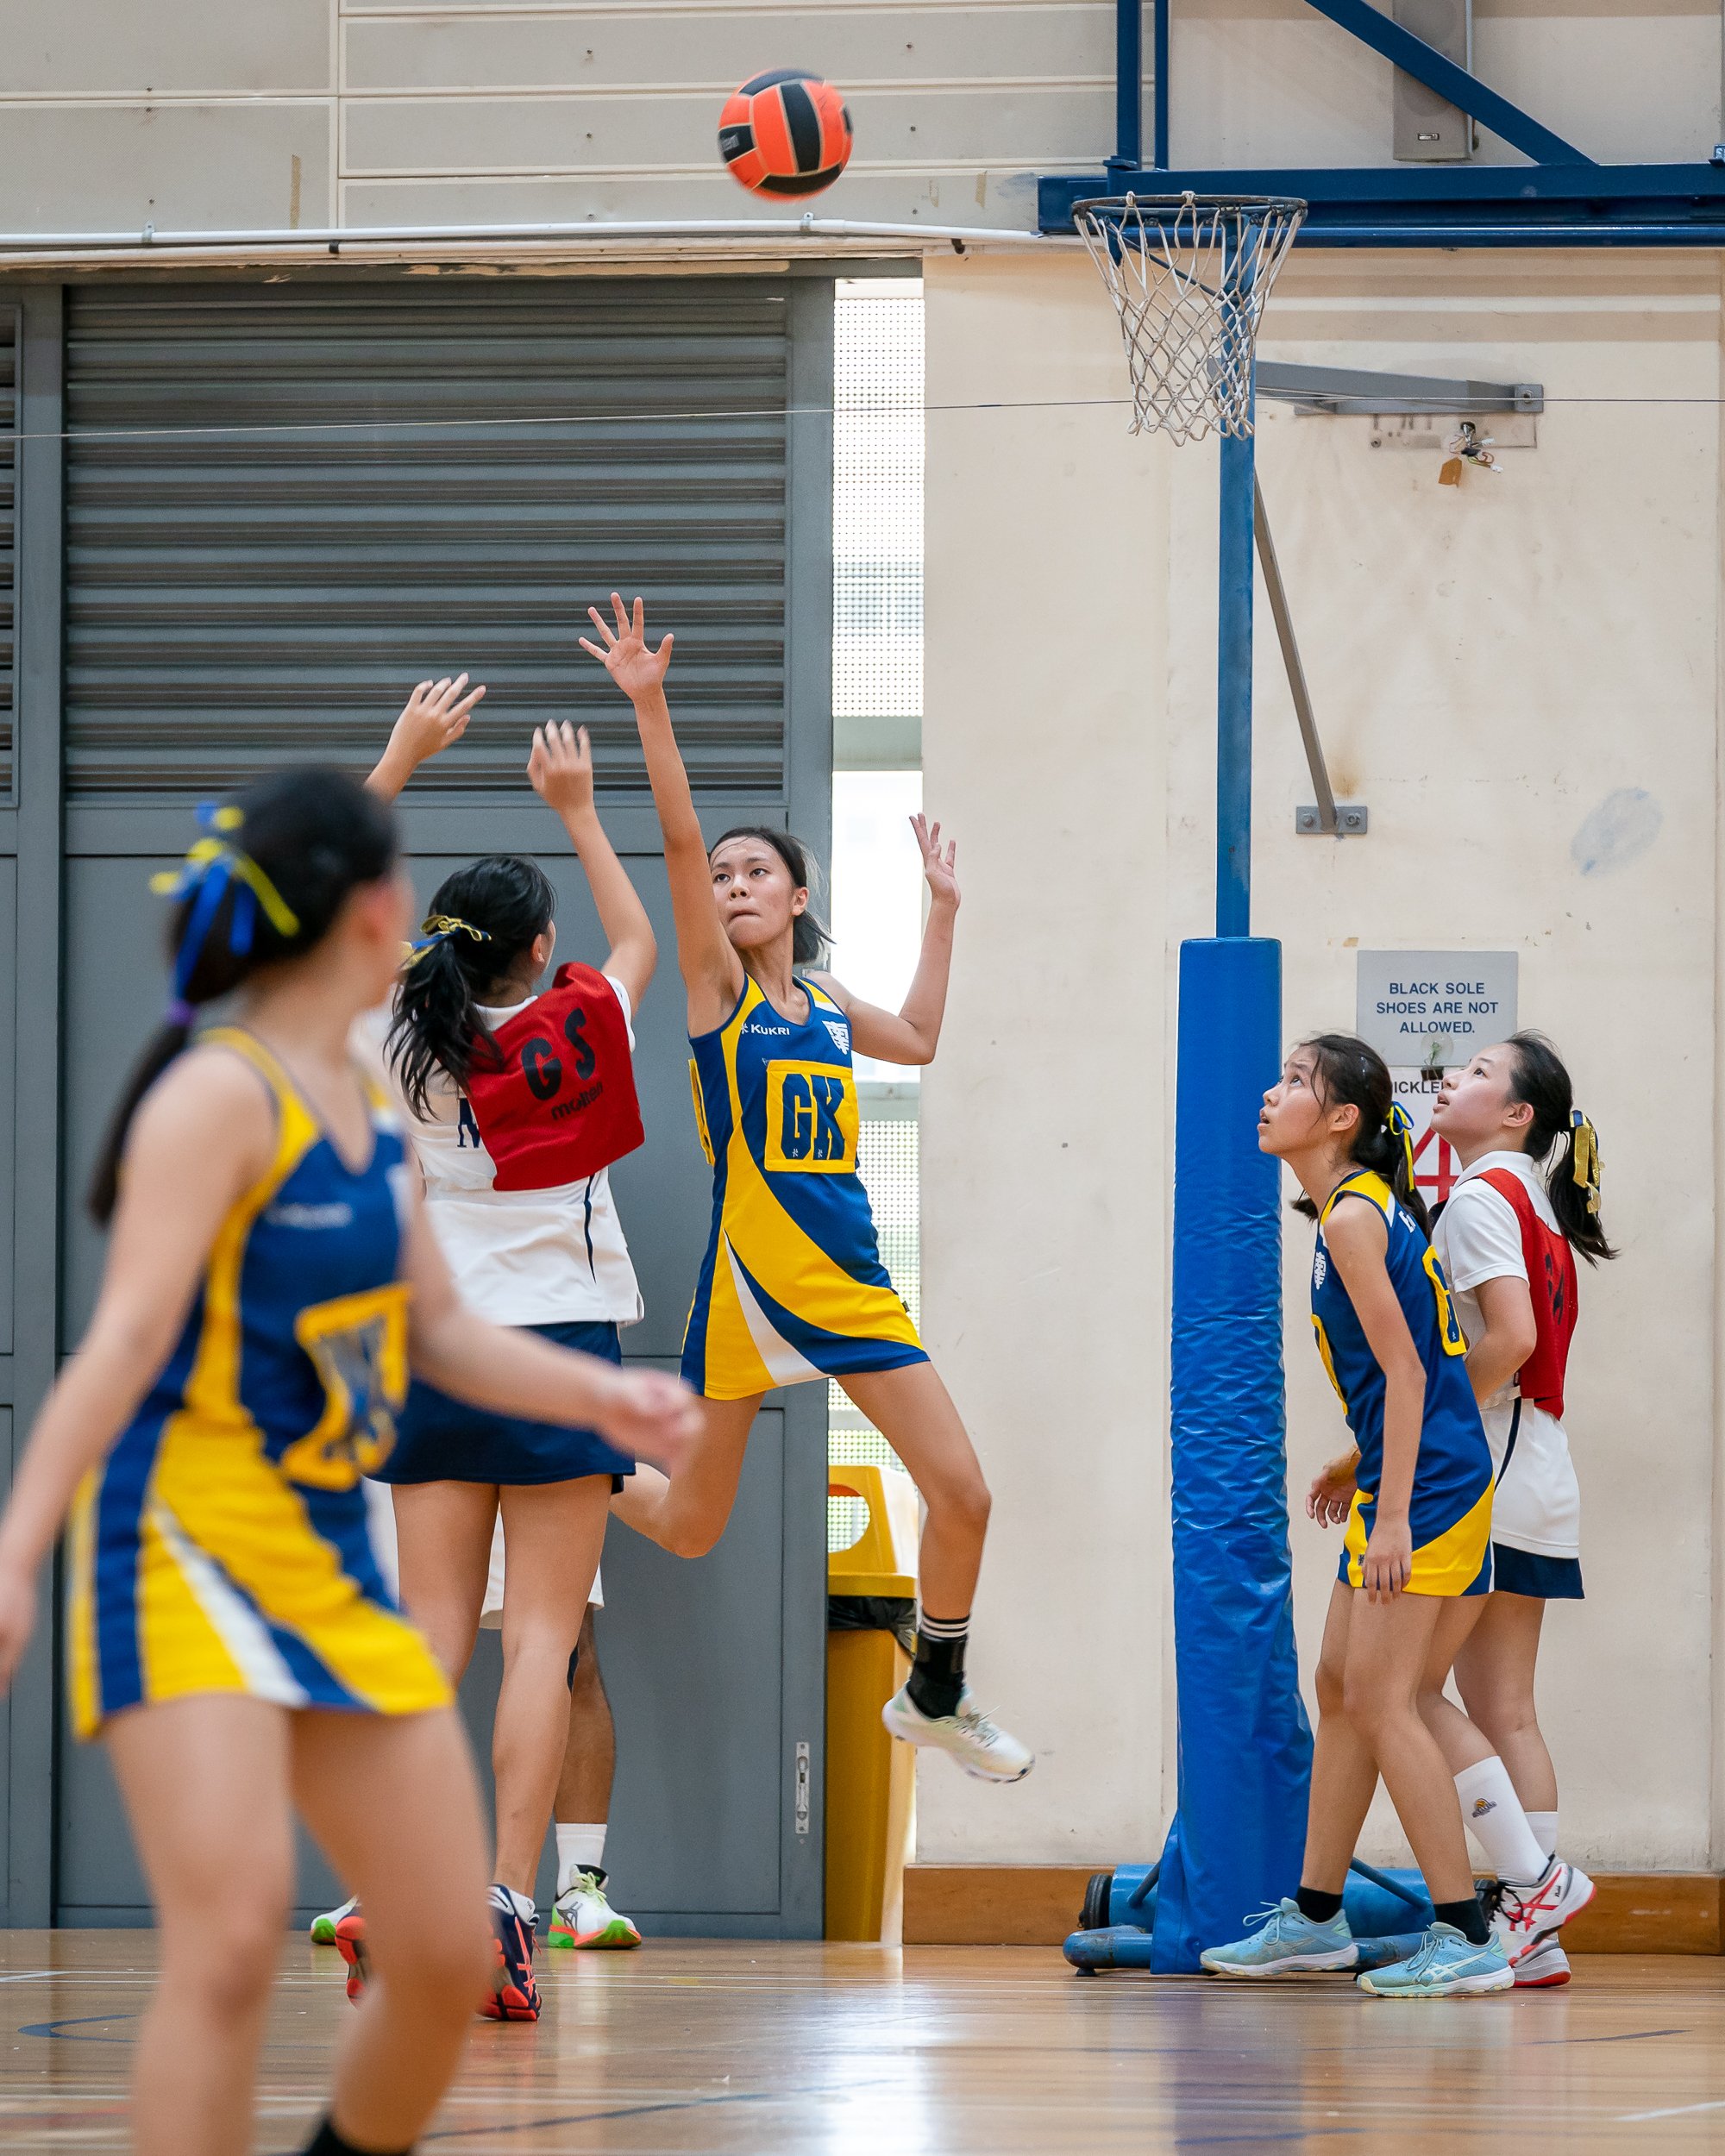 2022-05-19_NSG Netball_Photo By Ron Low_003